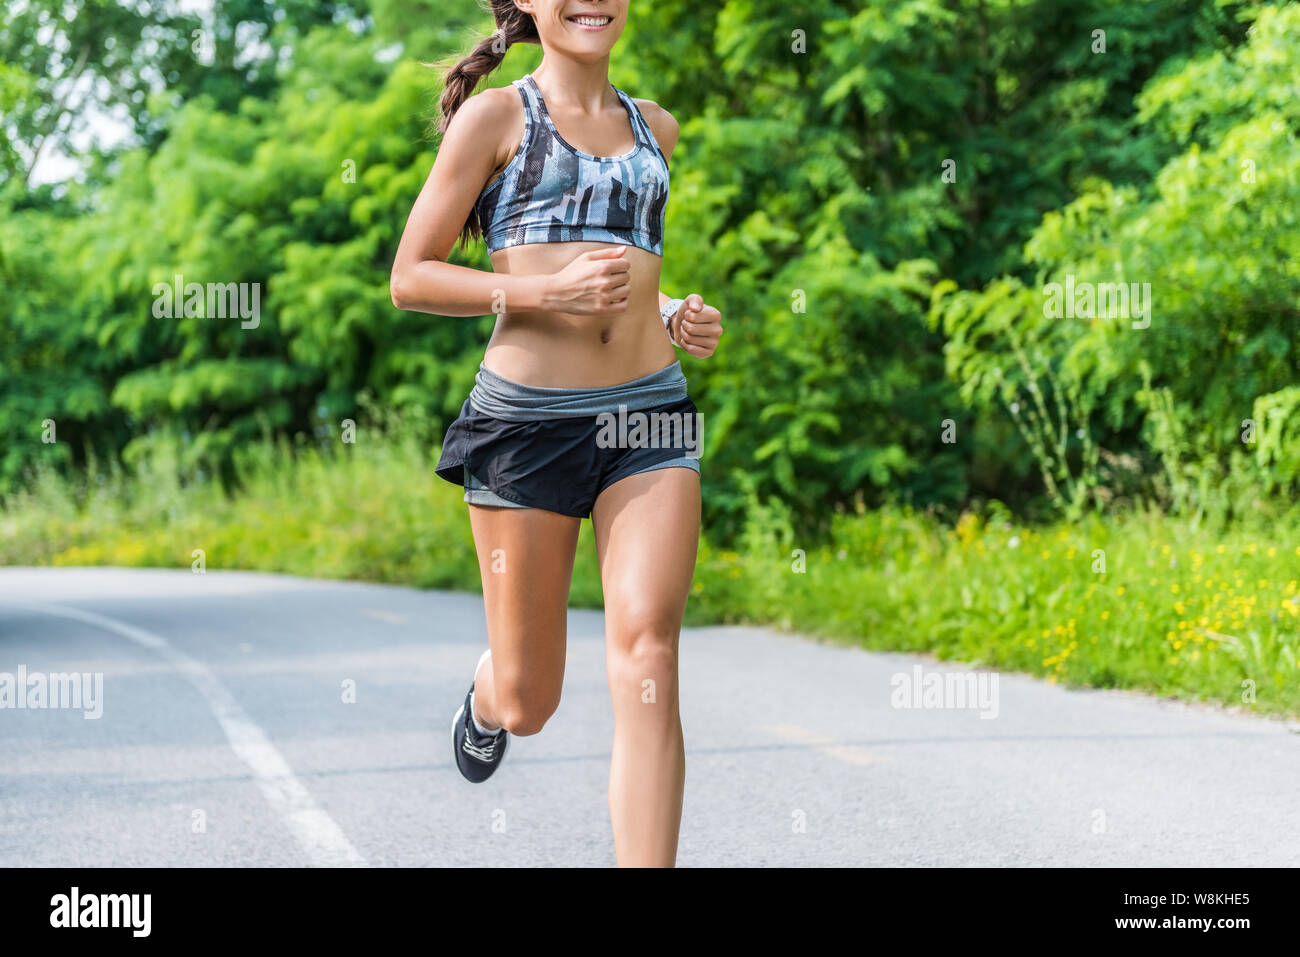 Fitness girl running in summer outdoor park. Happy fit athlete working out  in sports bra and 2-in-1 compression shorts fashion activewear outfit  showing off slim body and abs training for weight loss